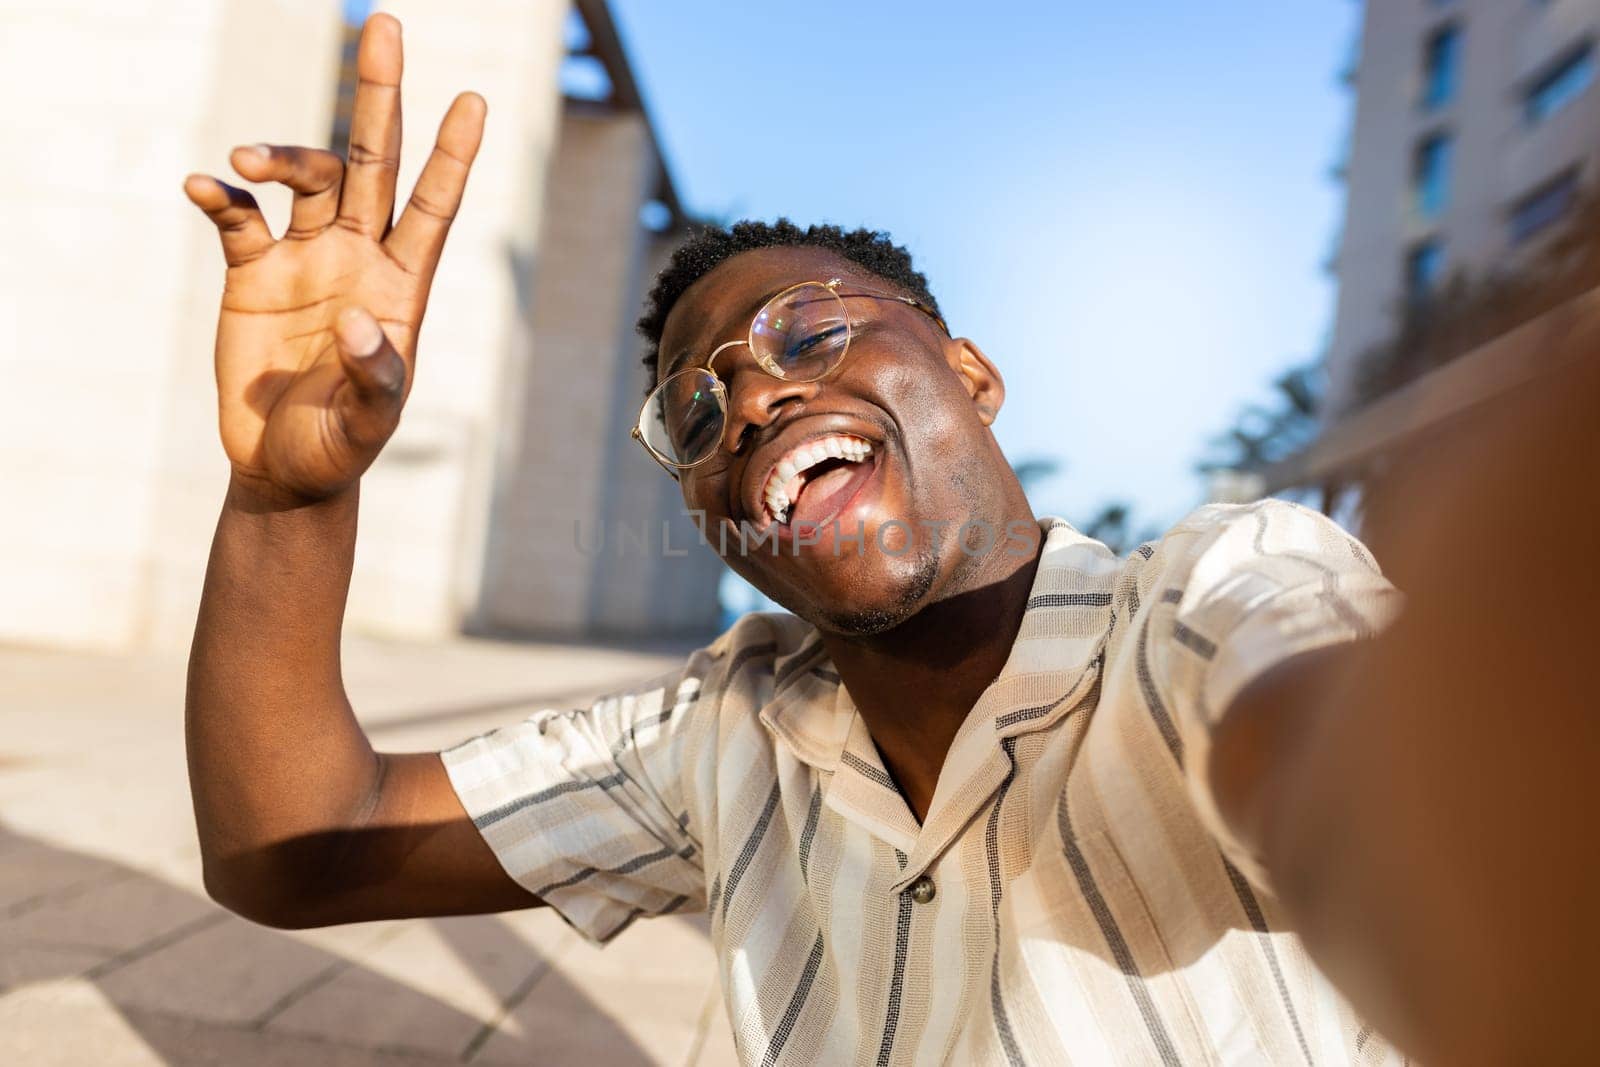 African american man with glasses taking selfie outdoors looking at camera waving hand. Lifestyle concept.